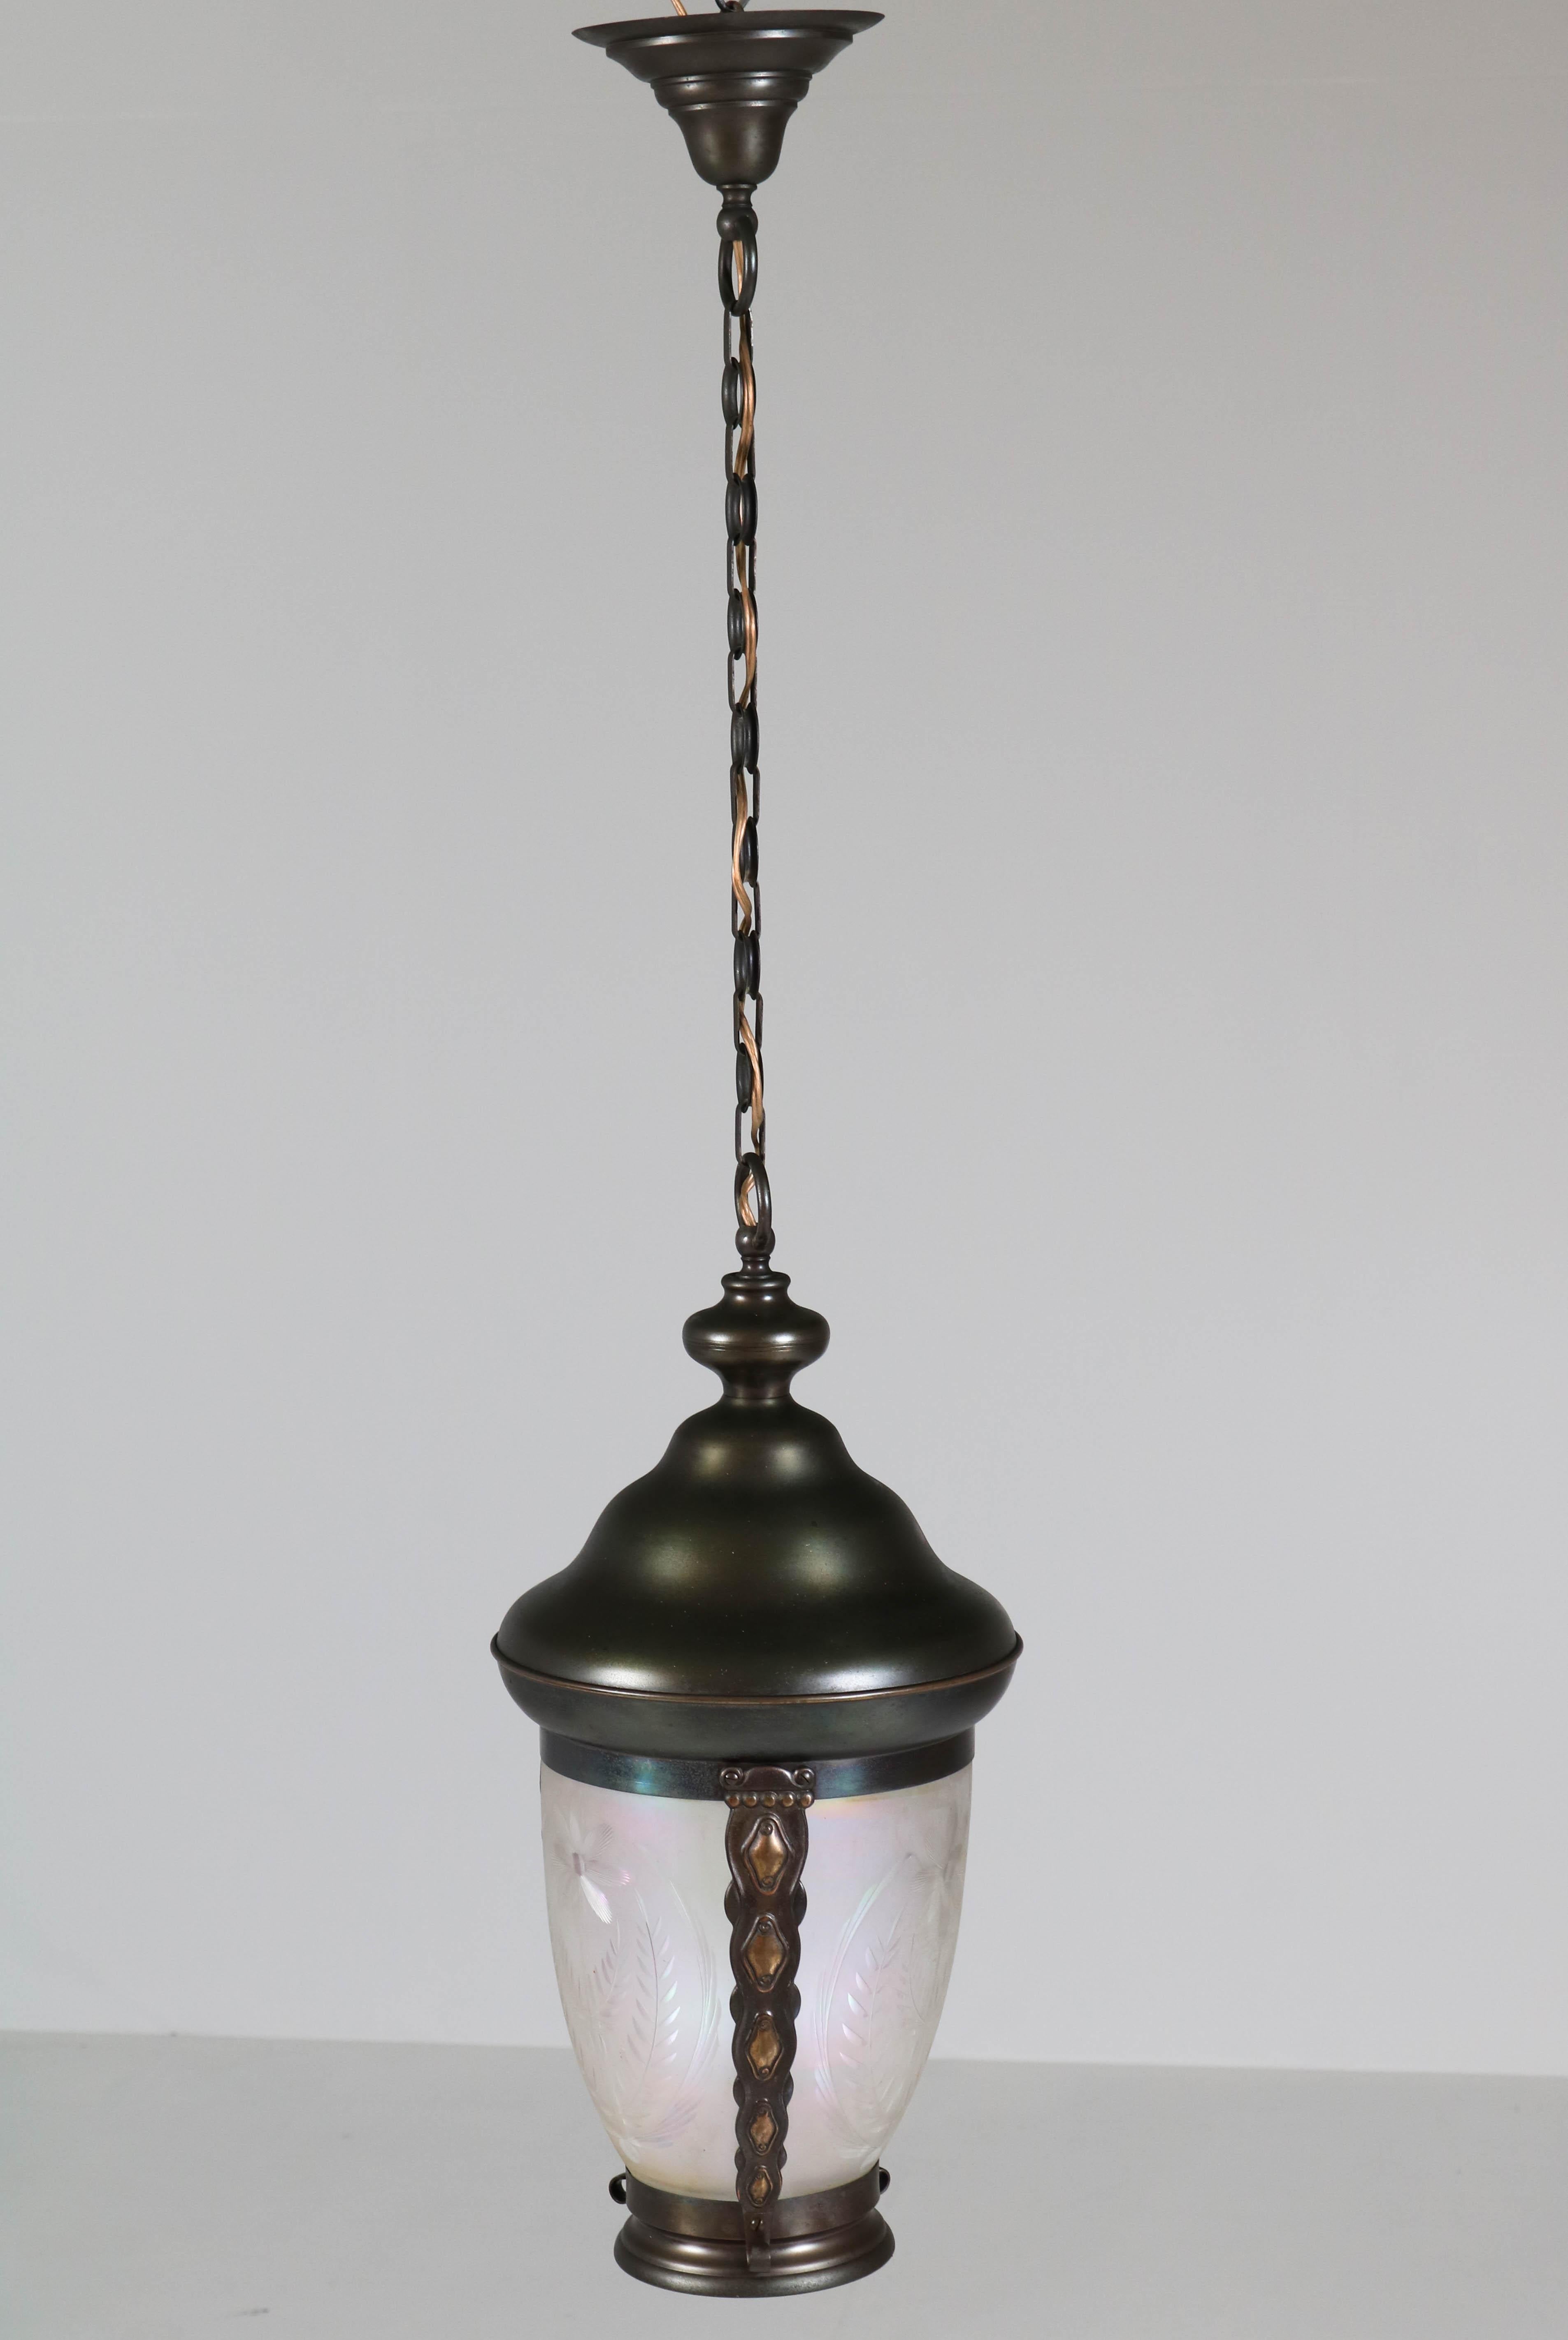 Brass Art Nouveau Lantern or Pendant Lamp with Petrol Glass Shade, 1900s For Sale 2